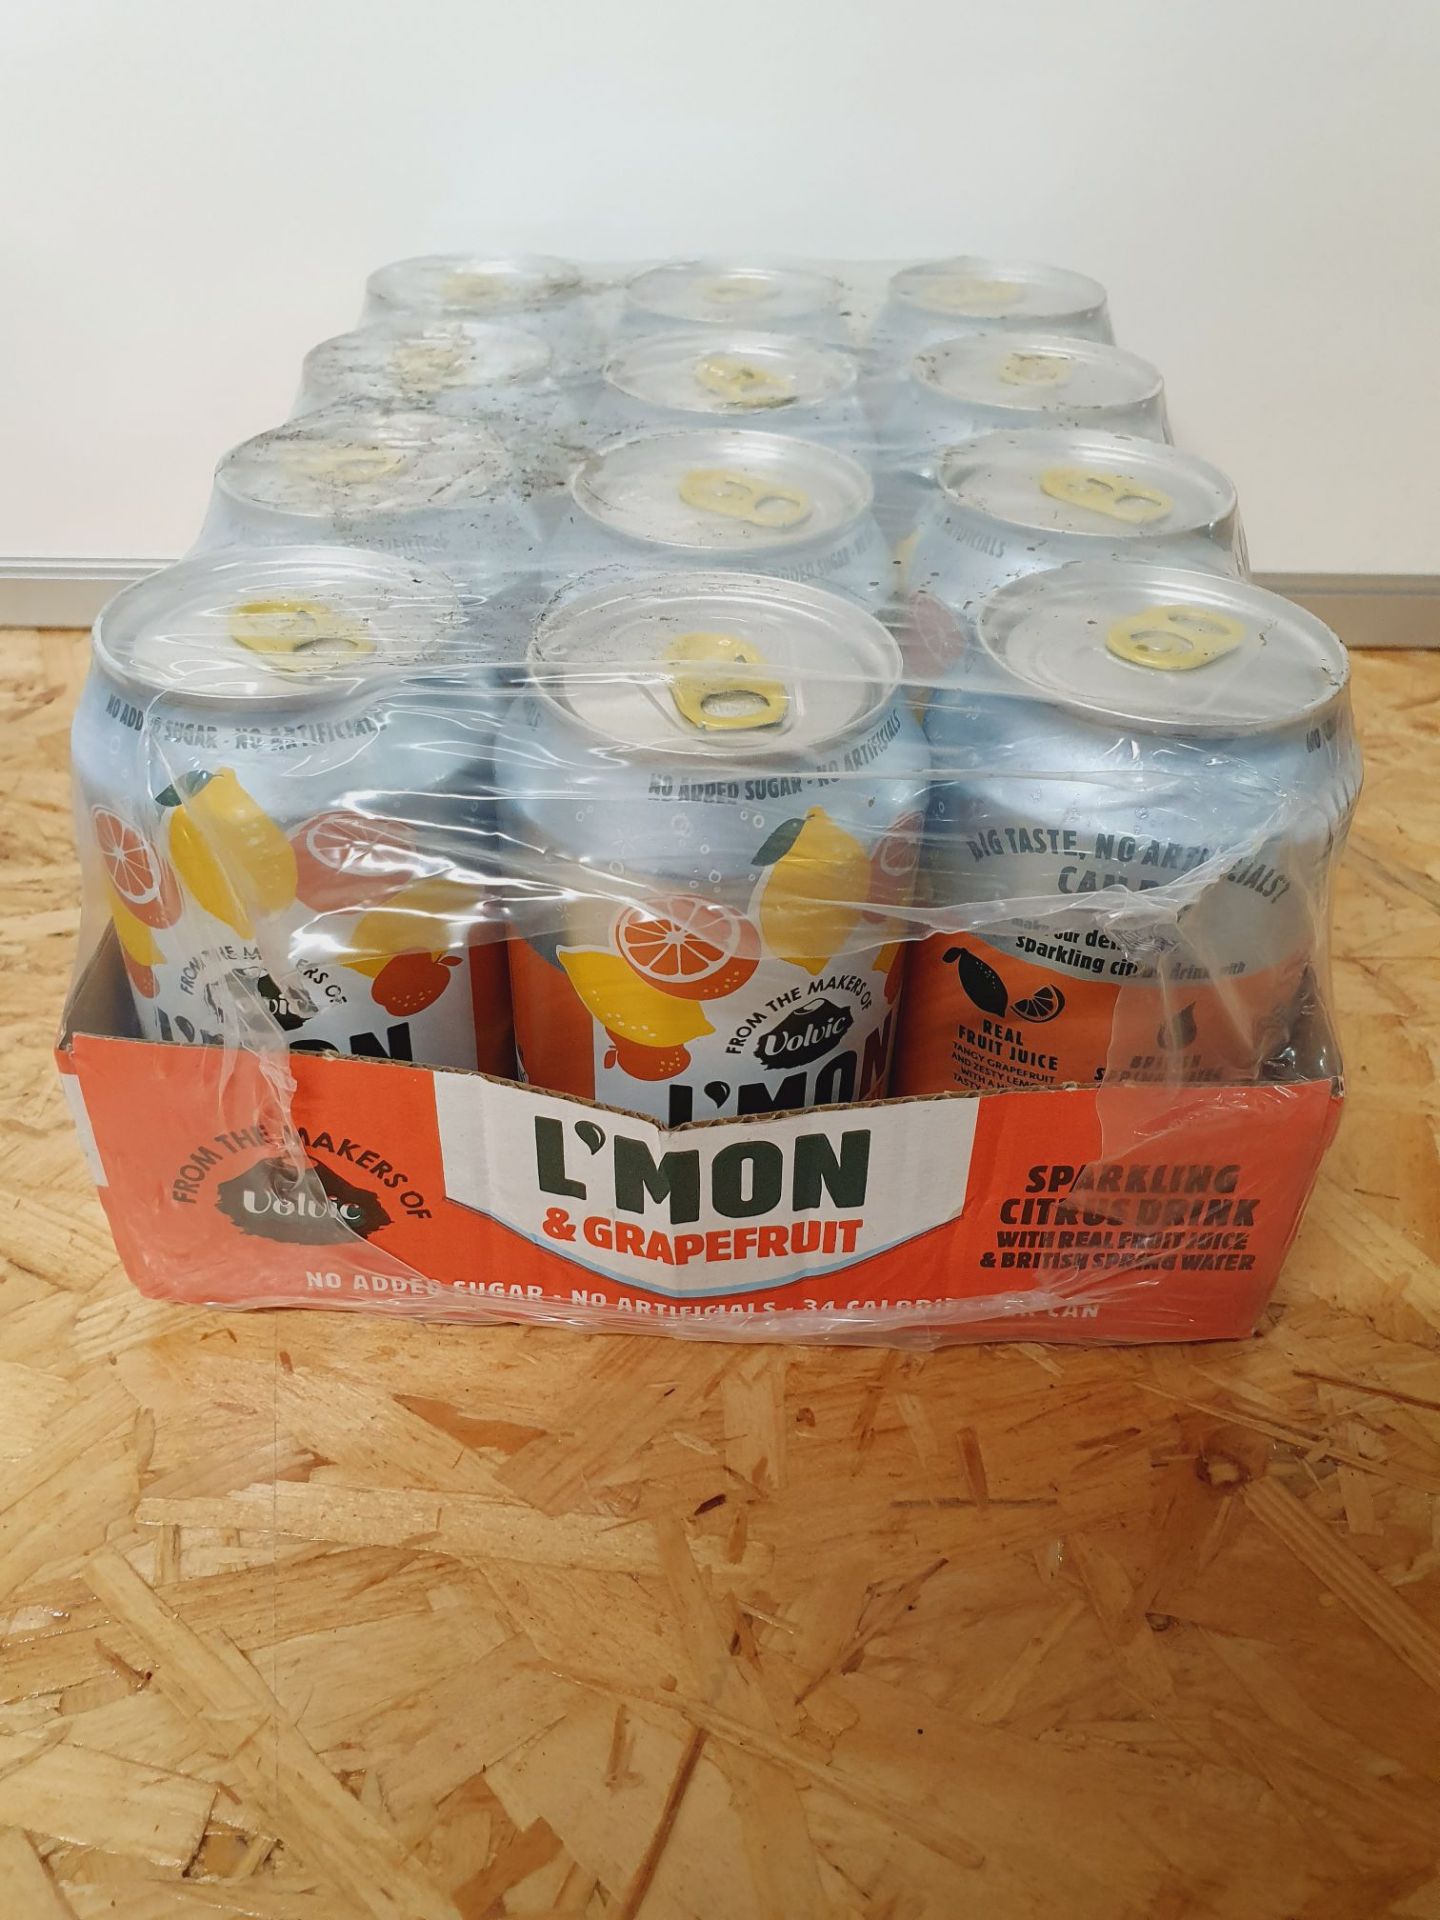 ONE LOT TO CONTAIN ONE CASE OF L'MON AND GRAPEFRUIT VOLVIC SPARKLING WATER. 12 CANS PER CASE, 330ML